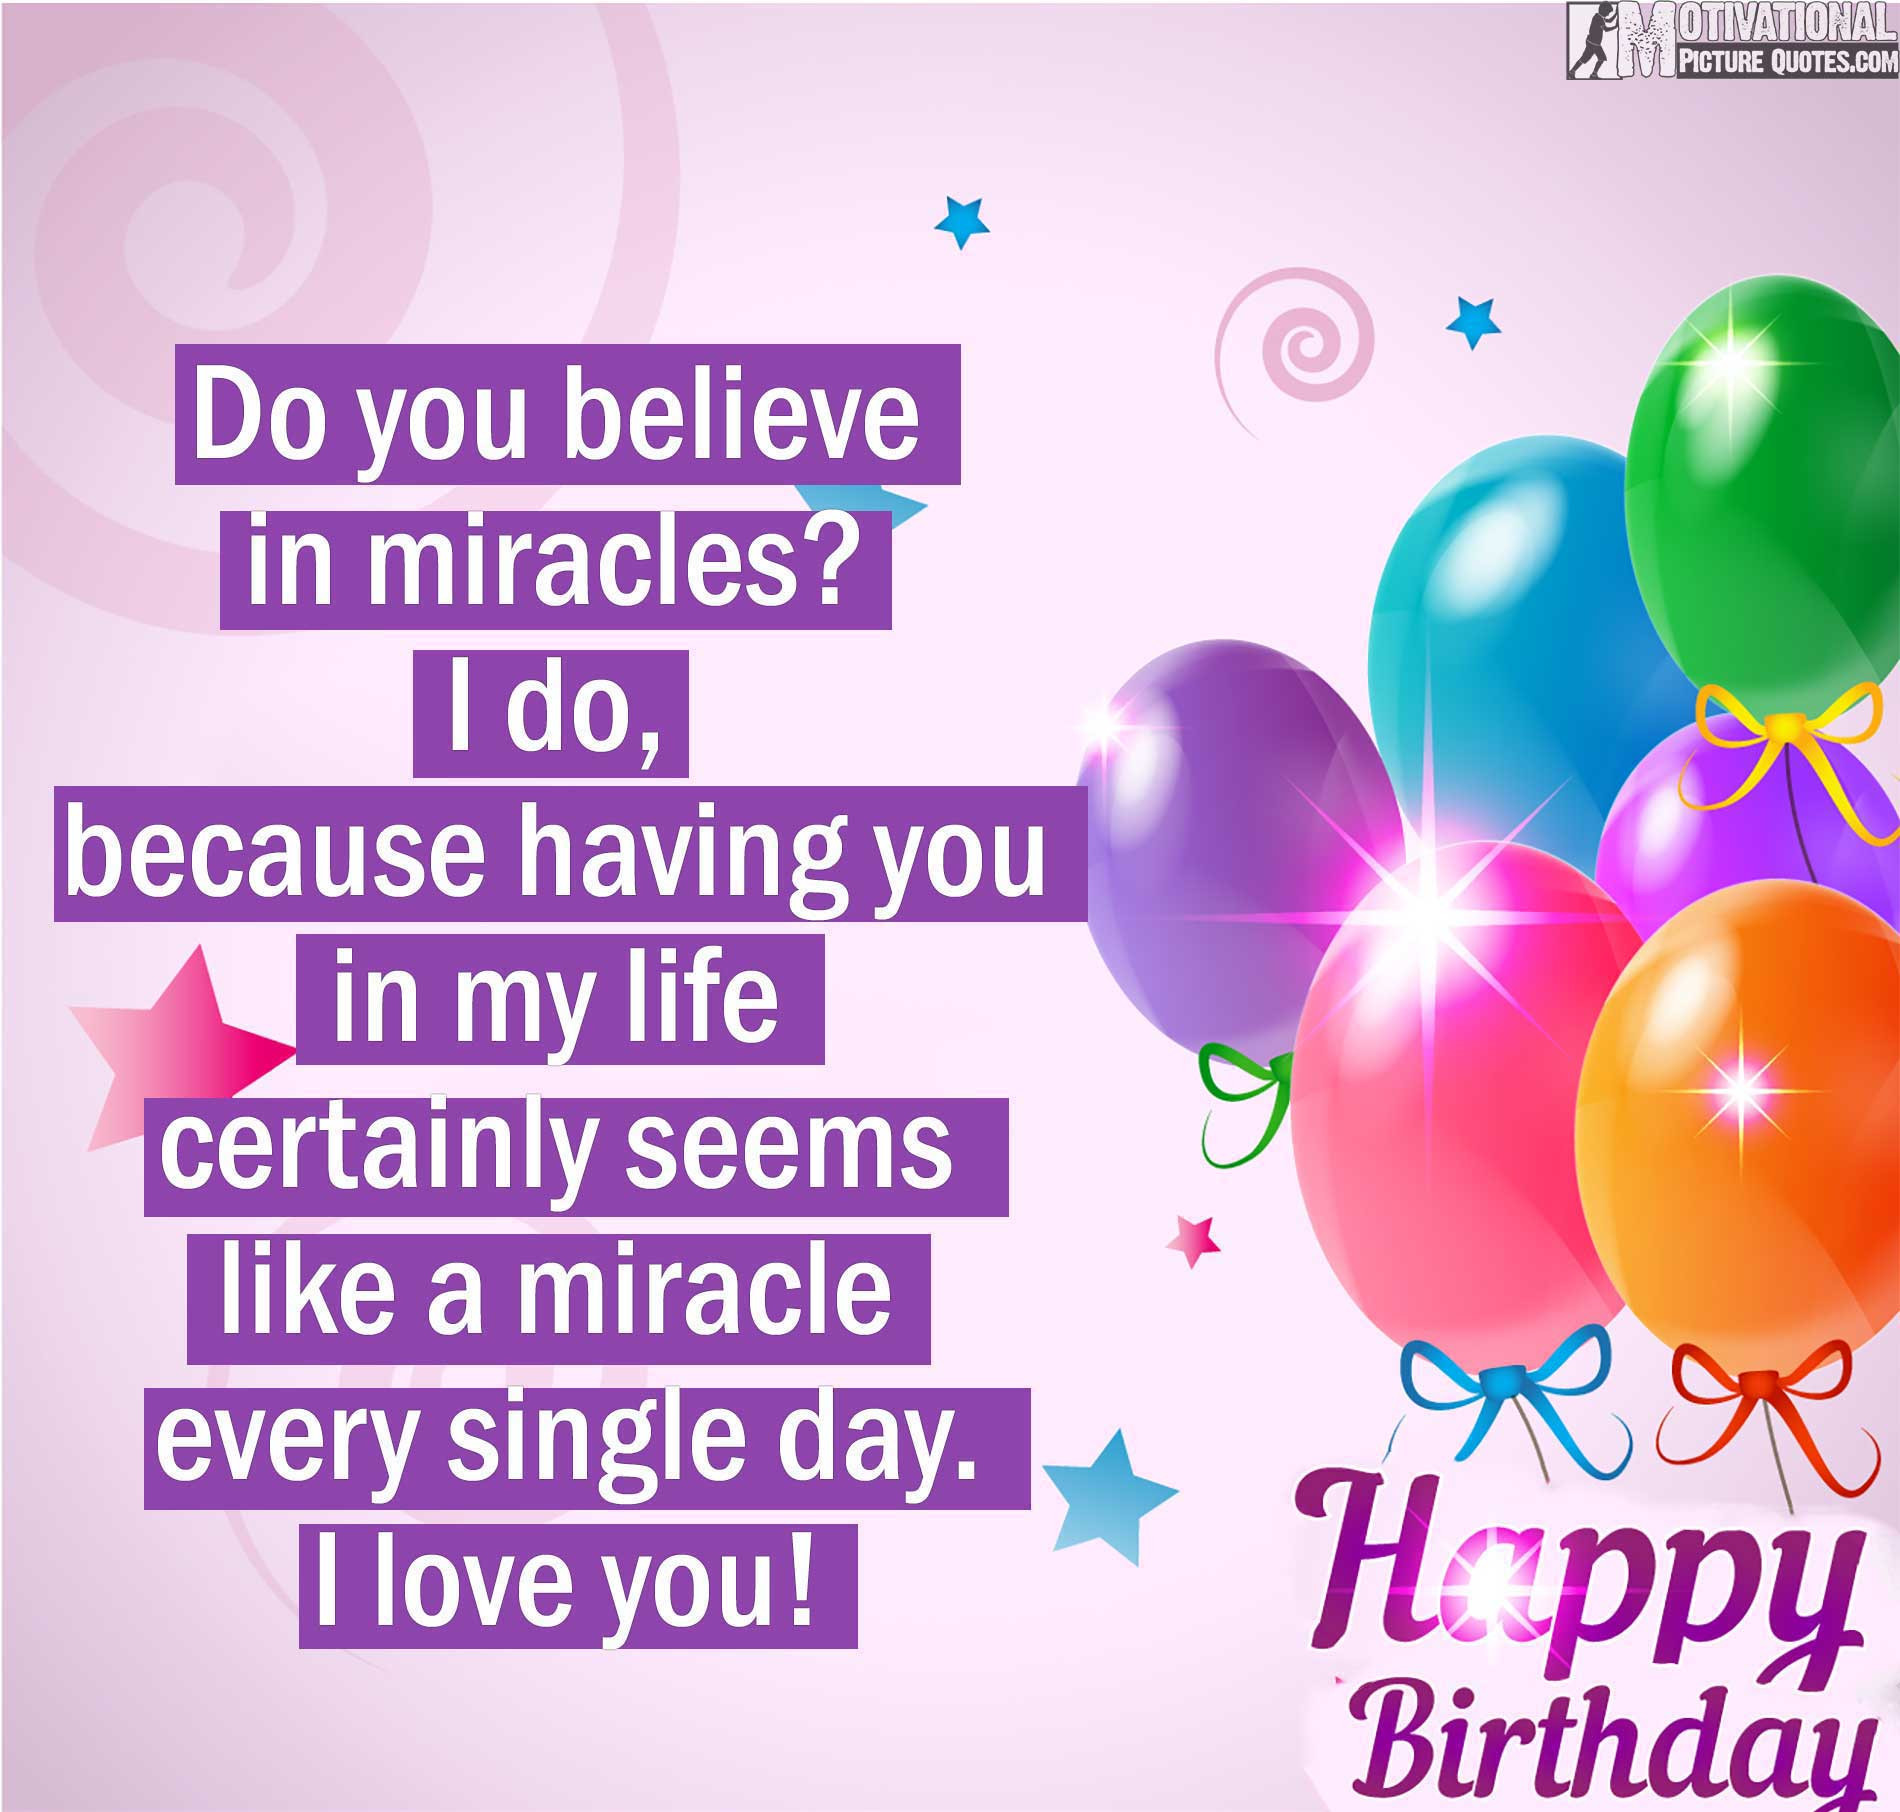 Quotes For Birthday
 35 Inspirational Birthday Quotes